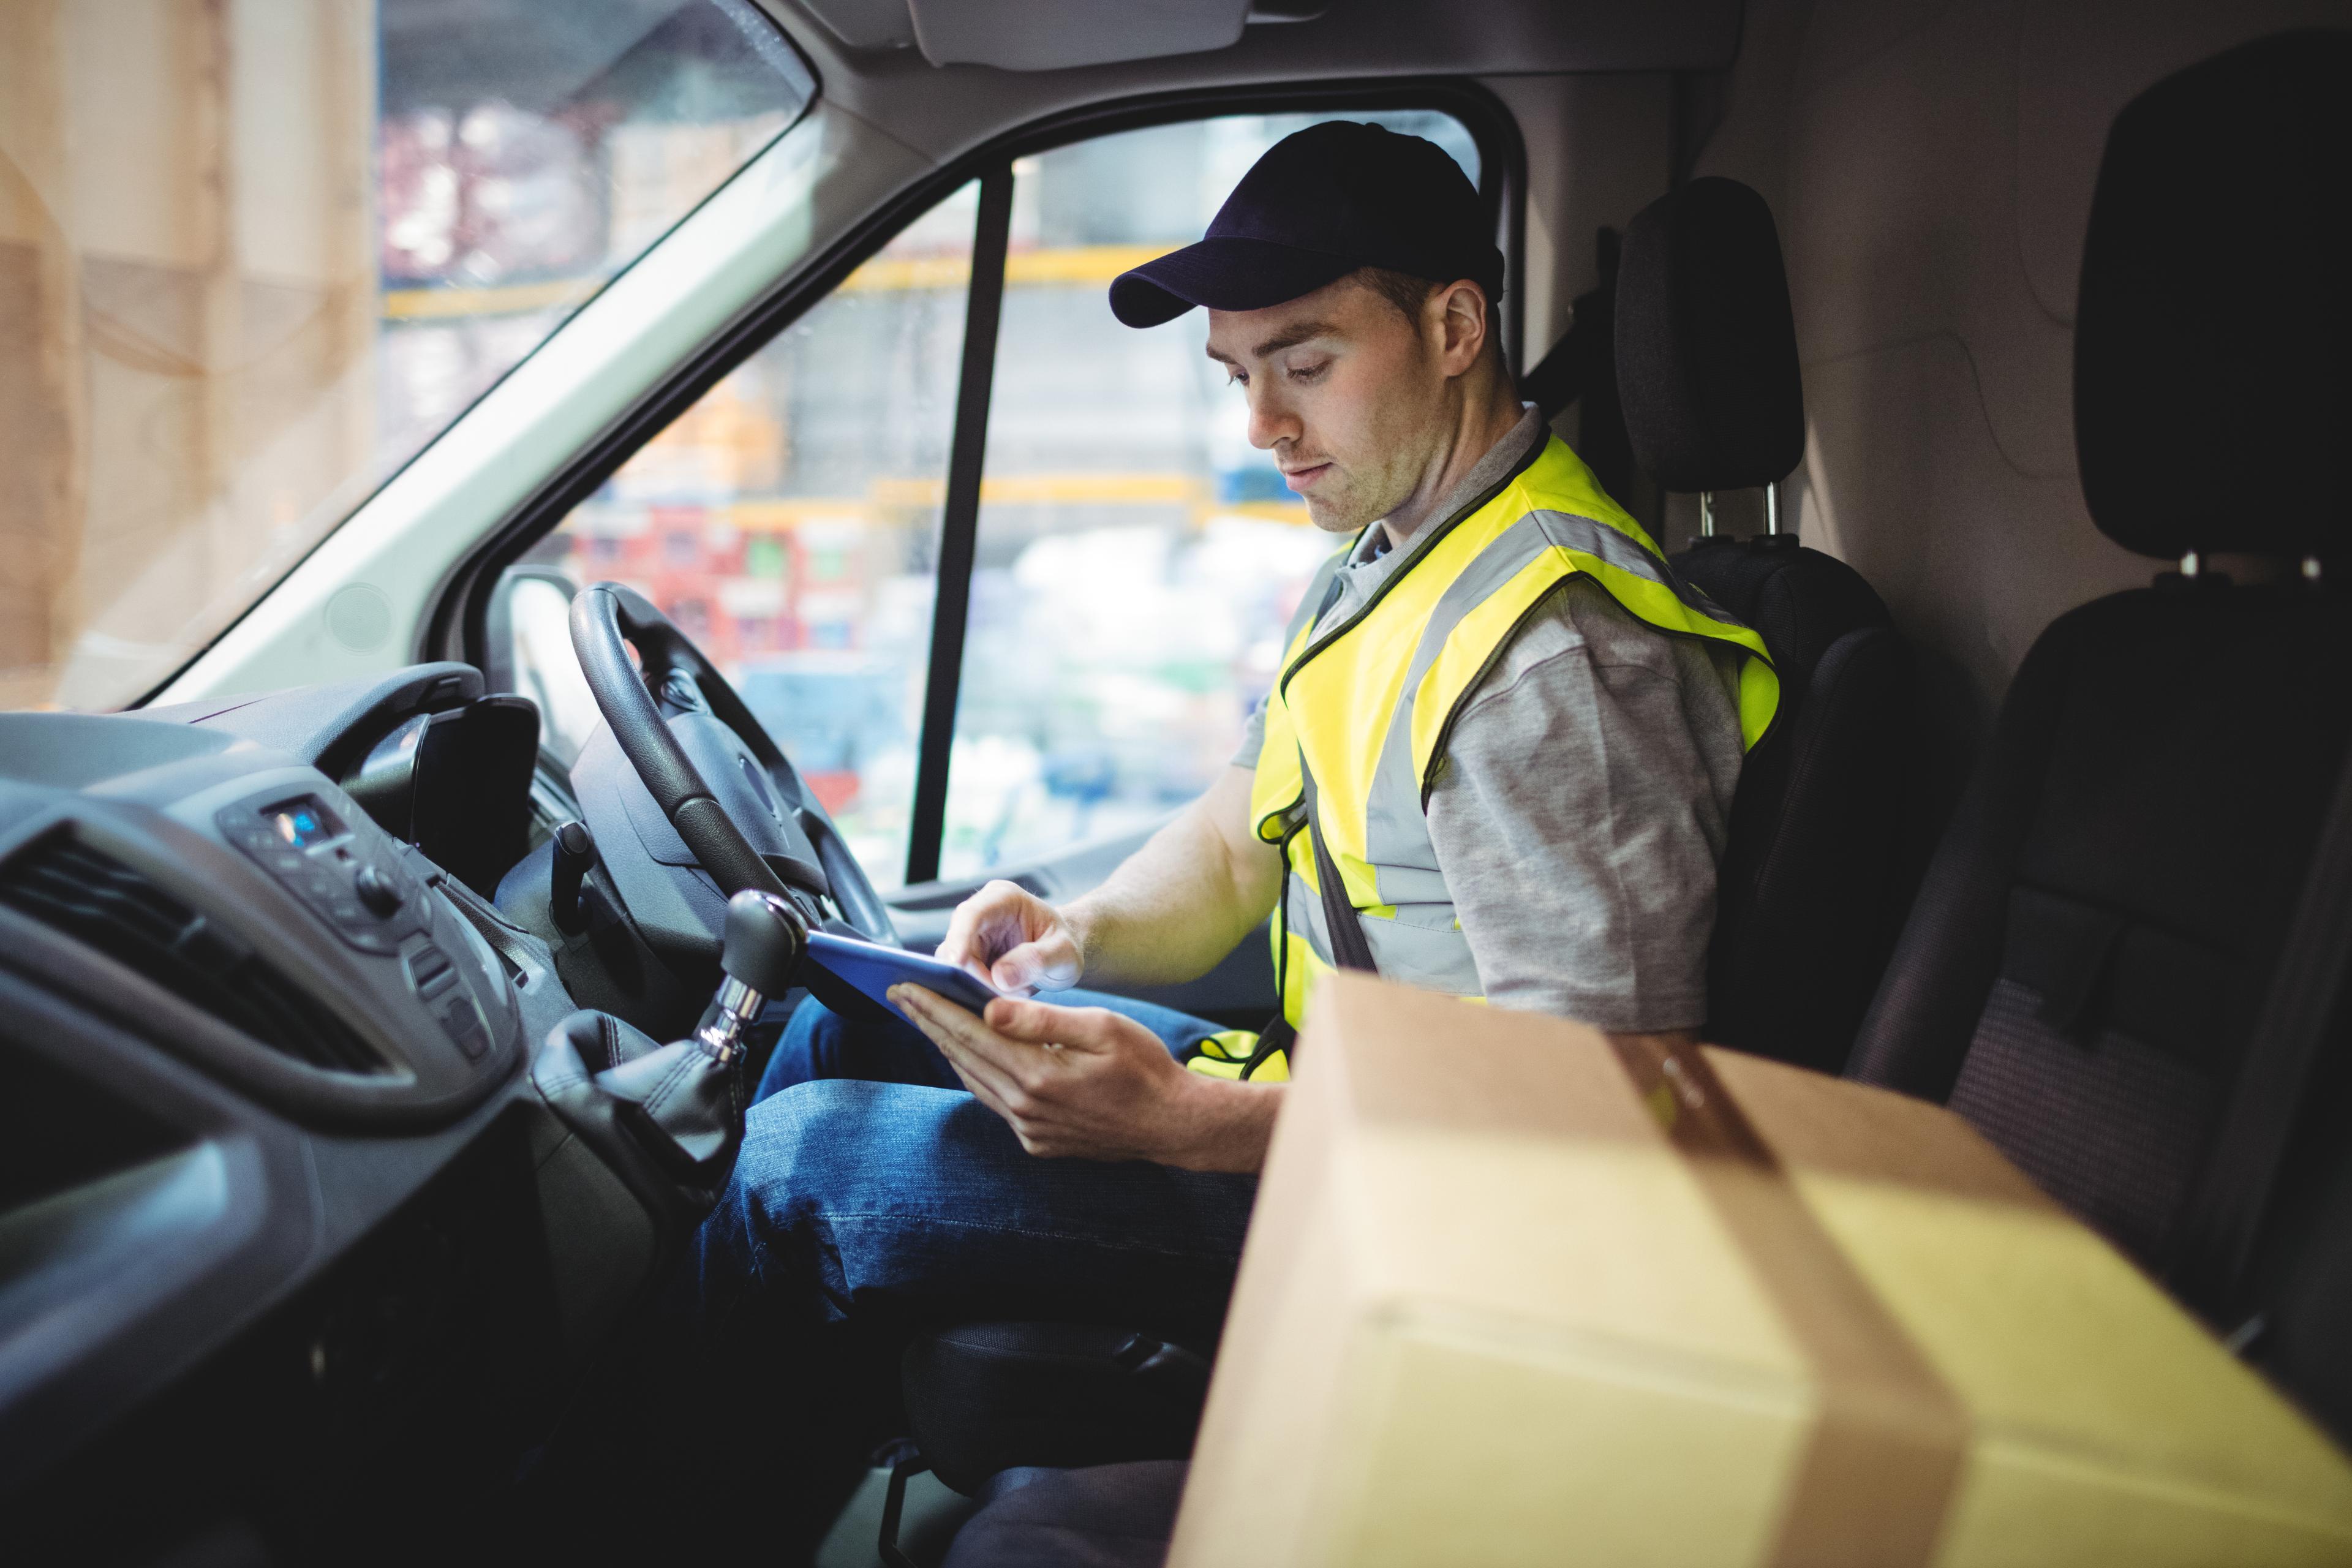 How to get courier van insurance that works for you